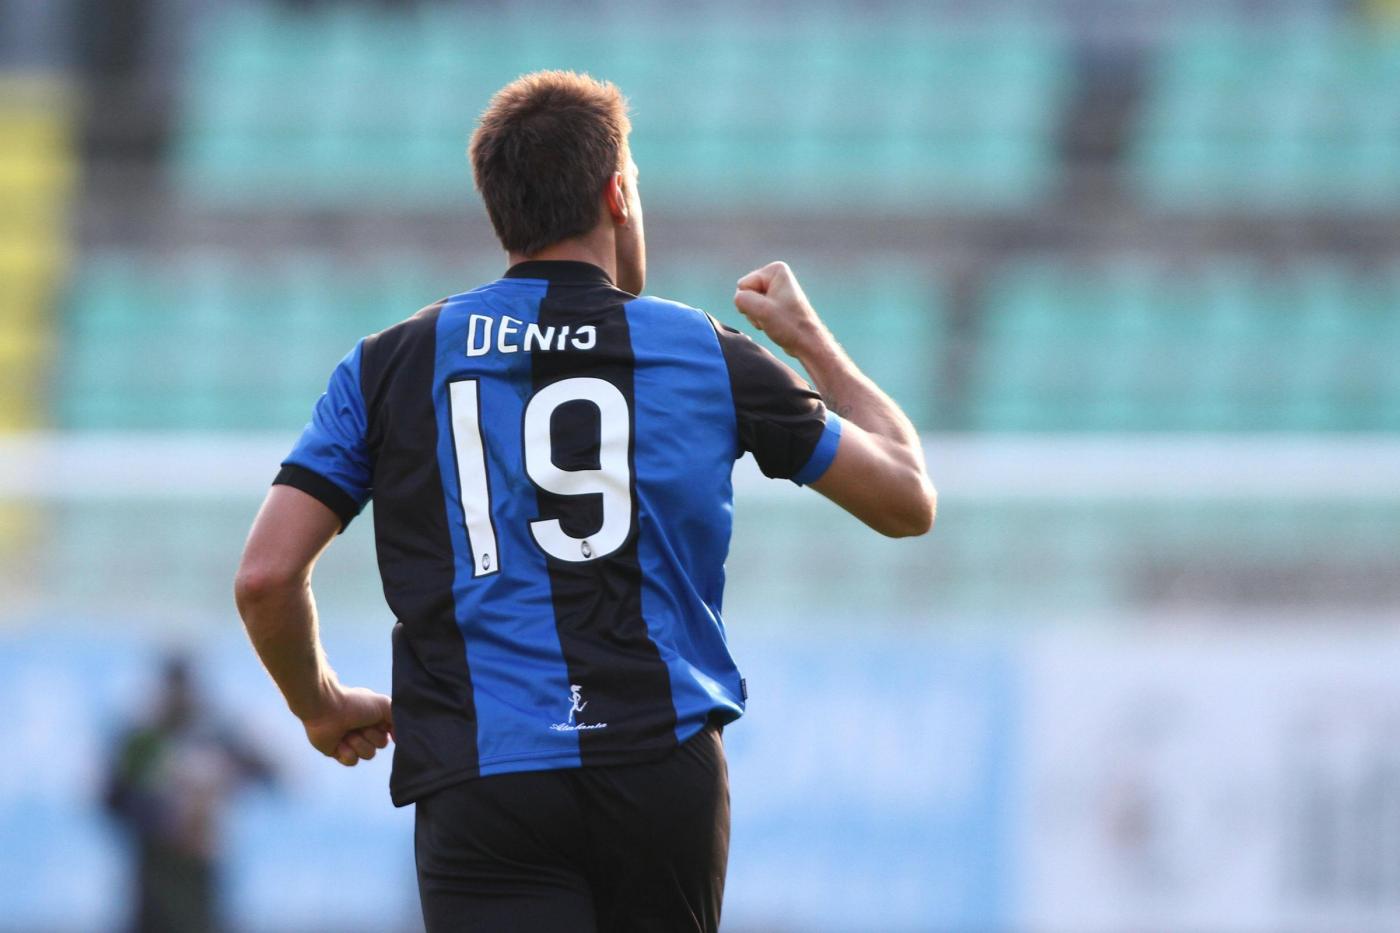 Marino won’t let go of Denis: “Inter? He kissed our jersey”